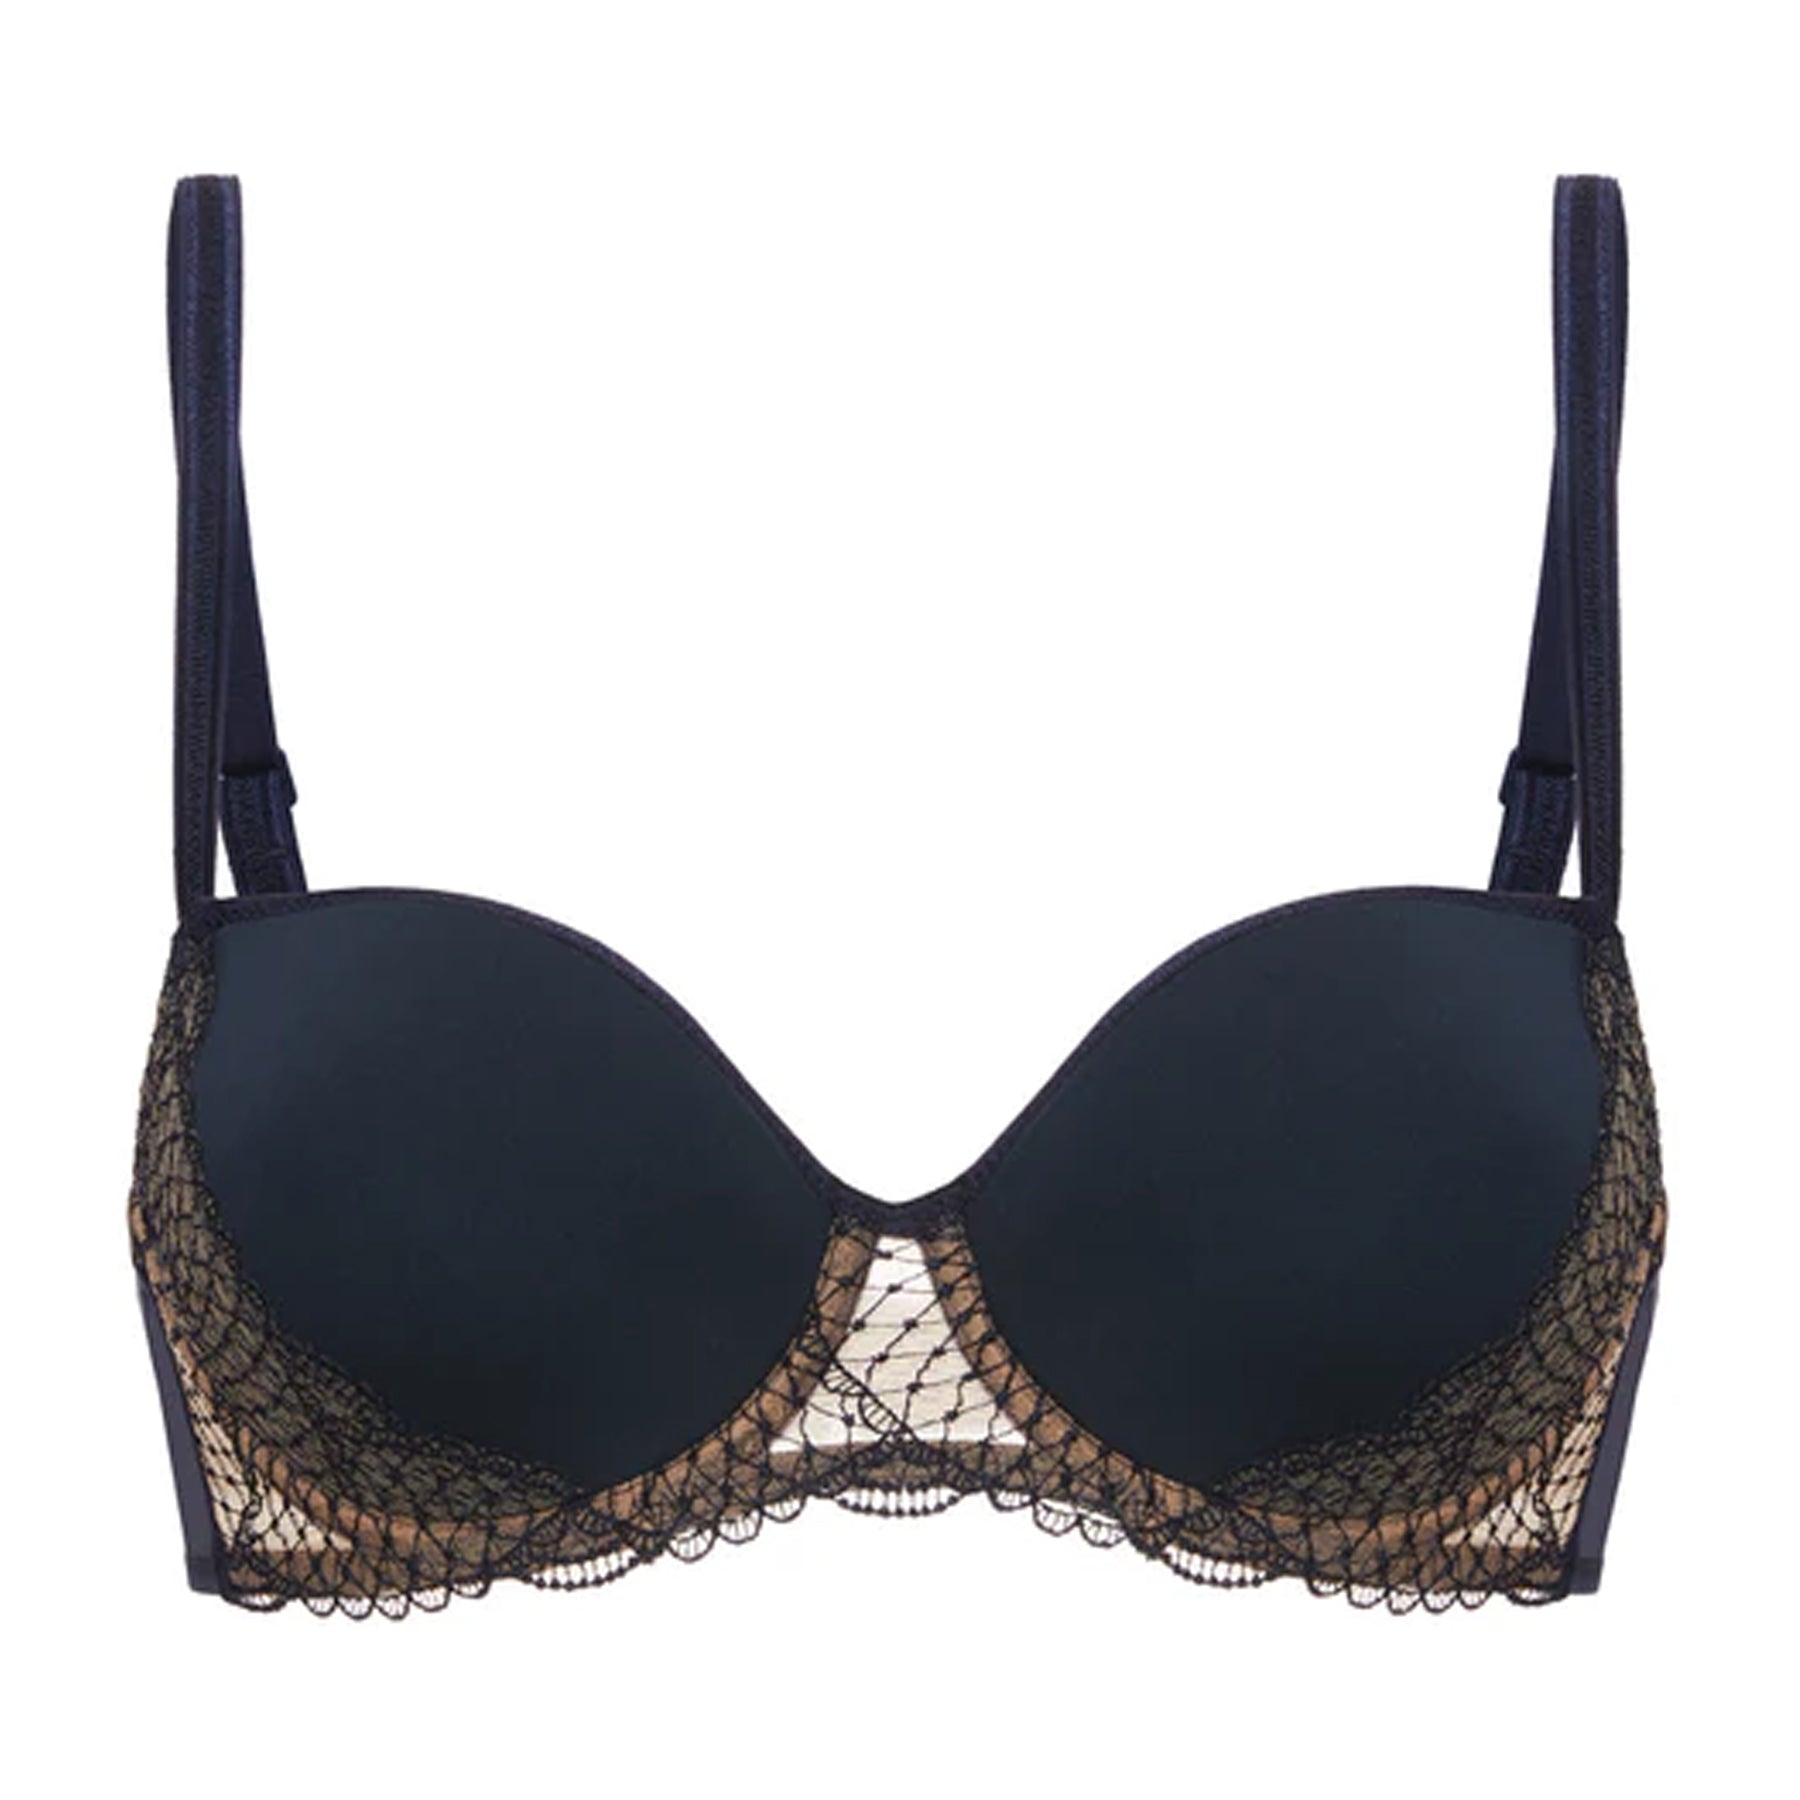 Buy Victoria's Secret Caramel Kiss Brown Lace Full Cup Push Up Bra